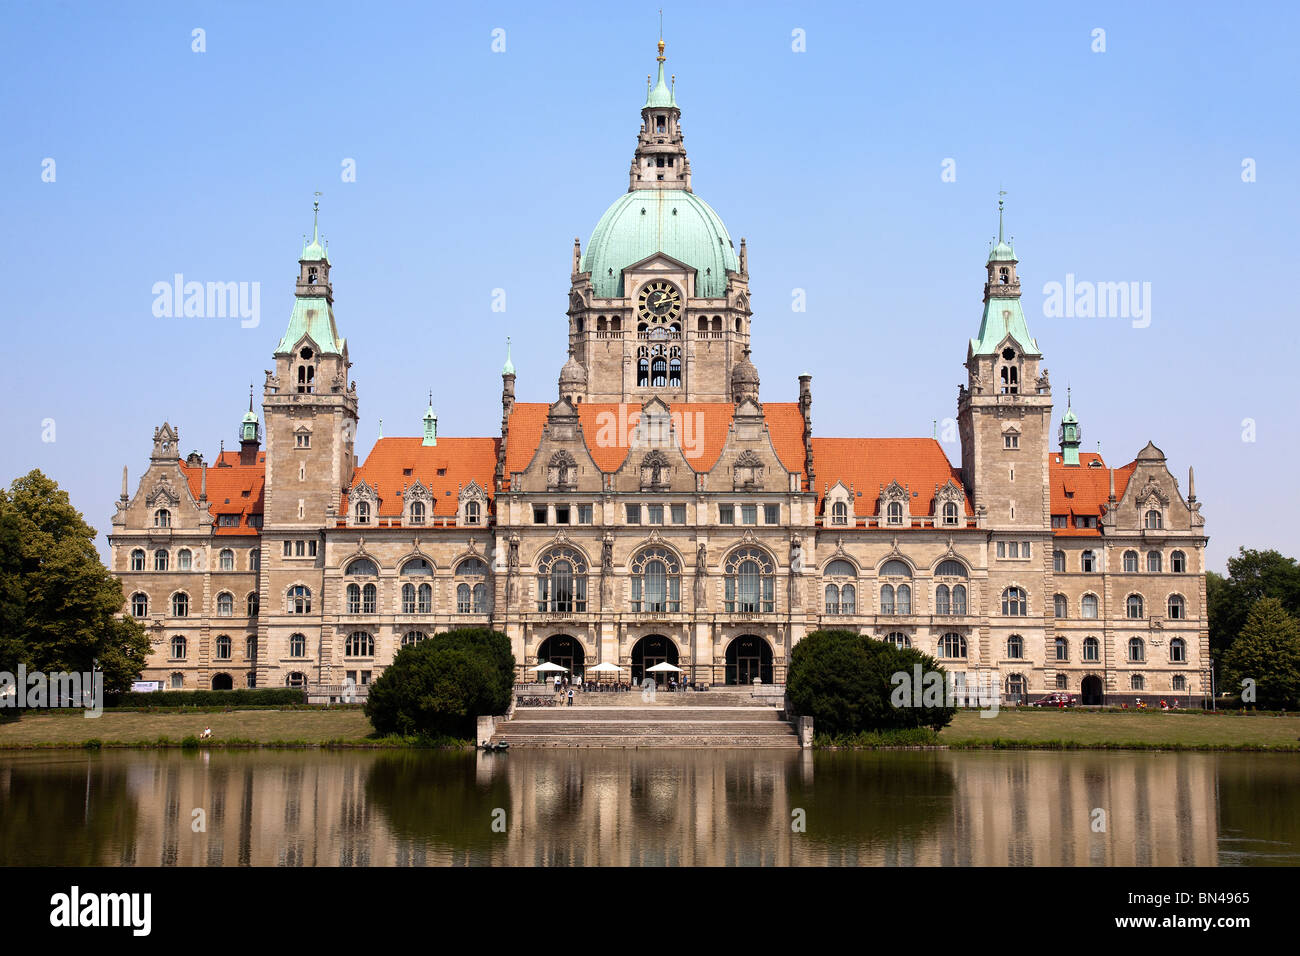 Neues Rathaus, Hannover, Lower Saxony, Germany Stock Photo